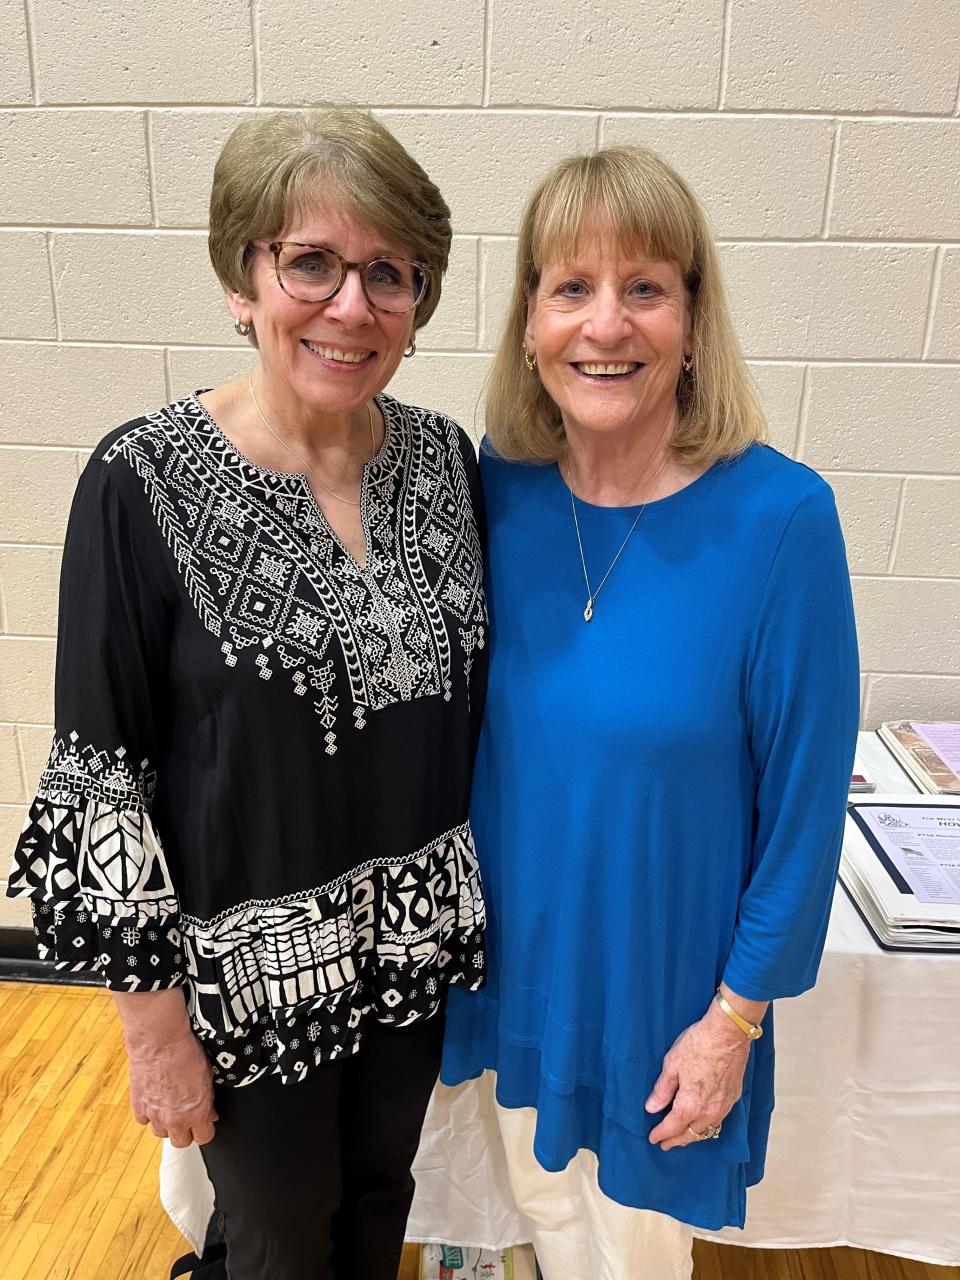 West Valley Middle School’s original parent-teacher association leaders Julie Mills, left, and Nancy Meyer are shown at the school’s 25th anniversary celebration on May 24, 2024, in the gymnasium.